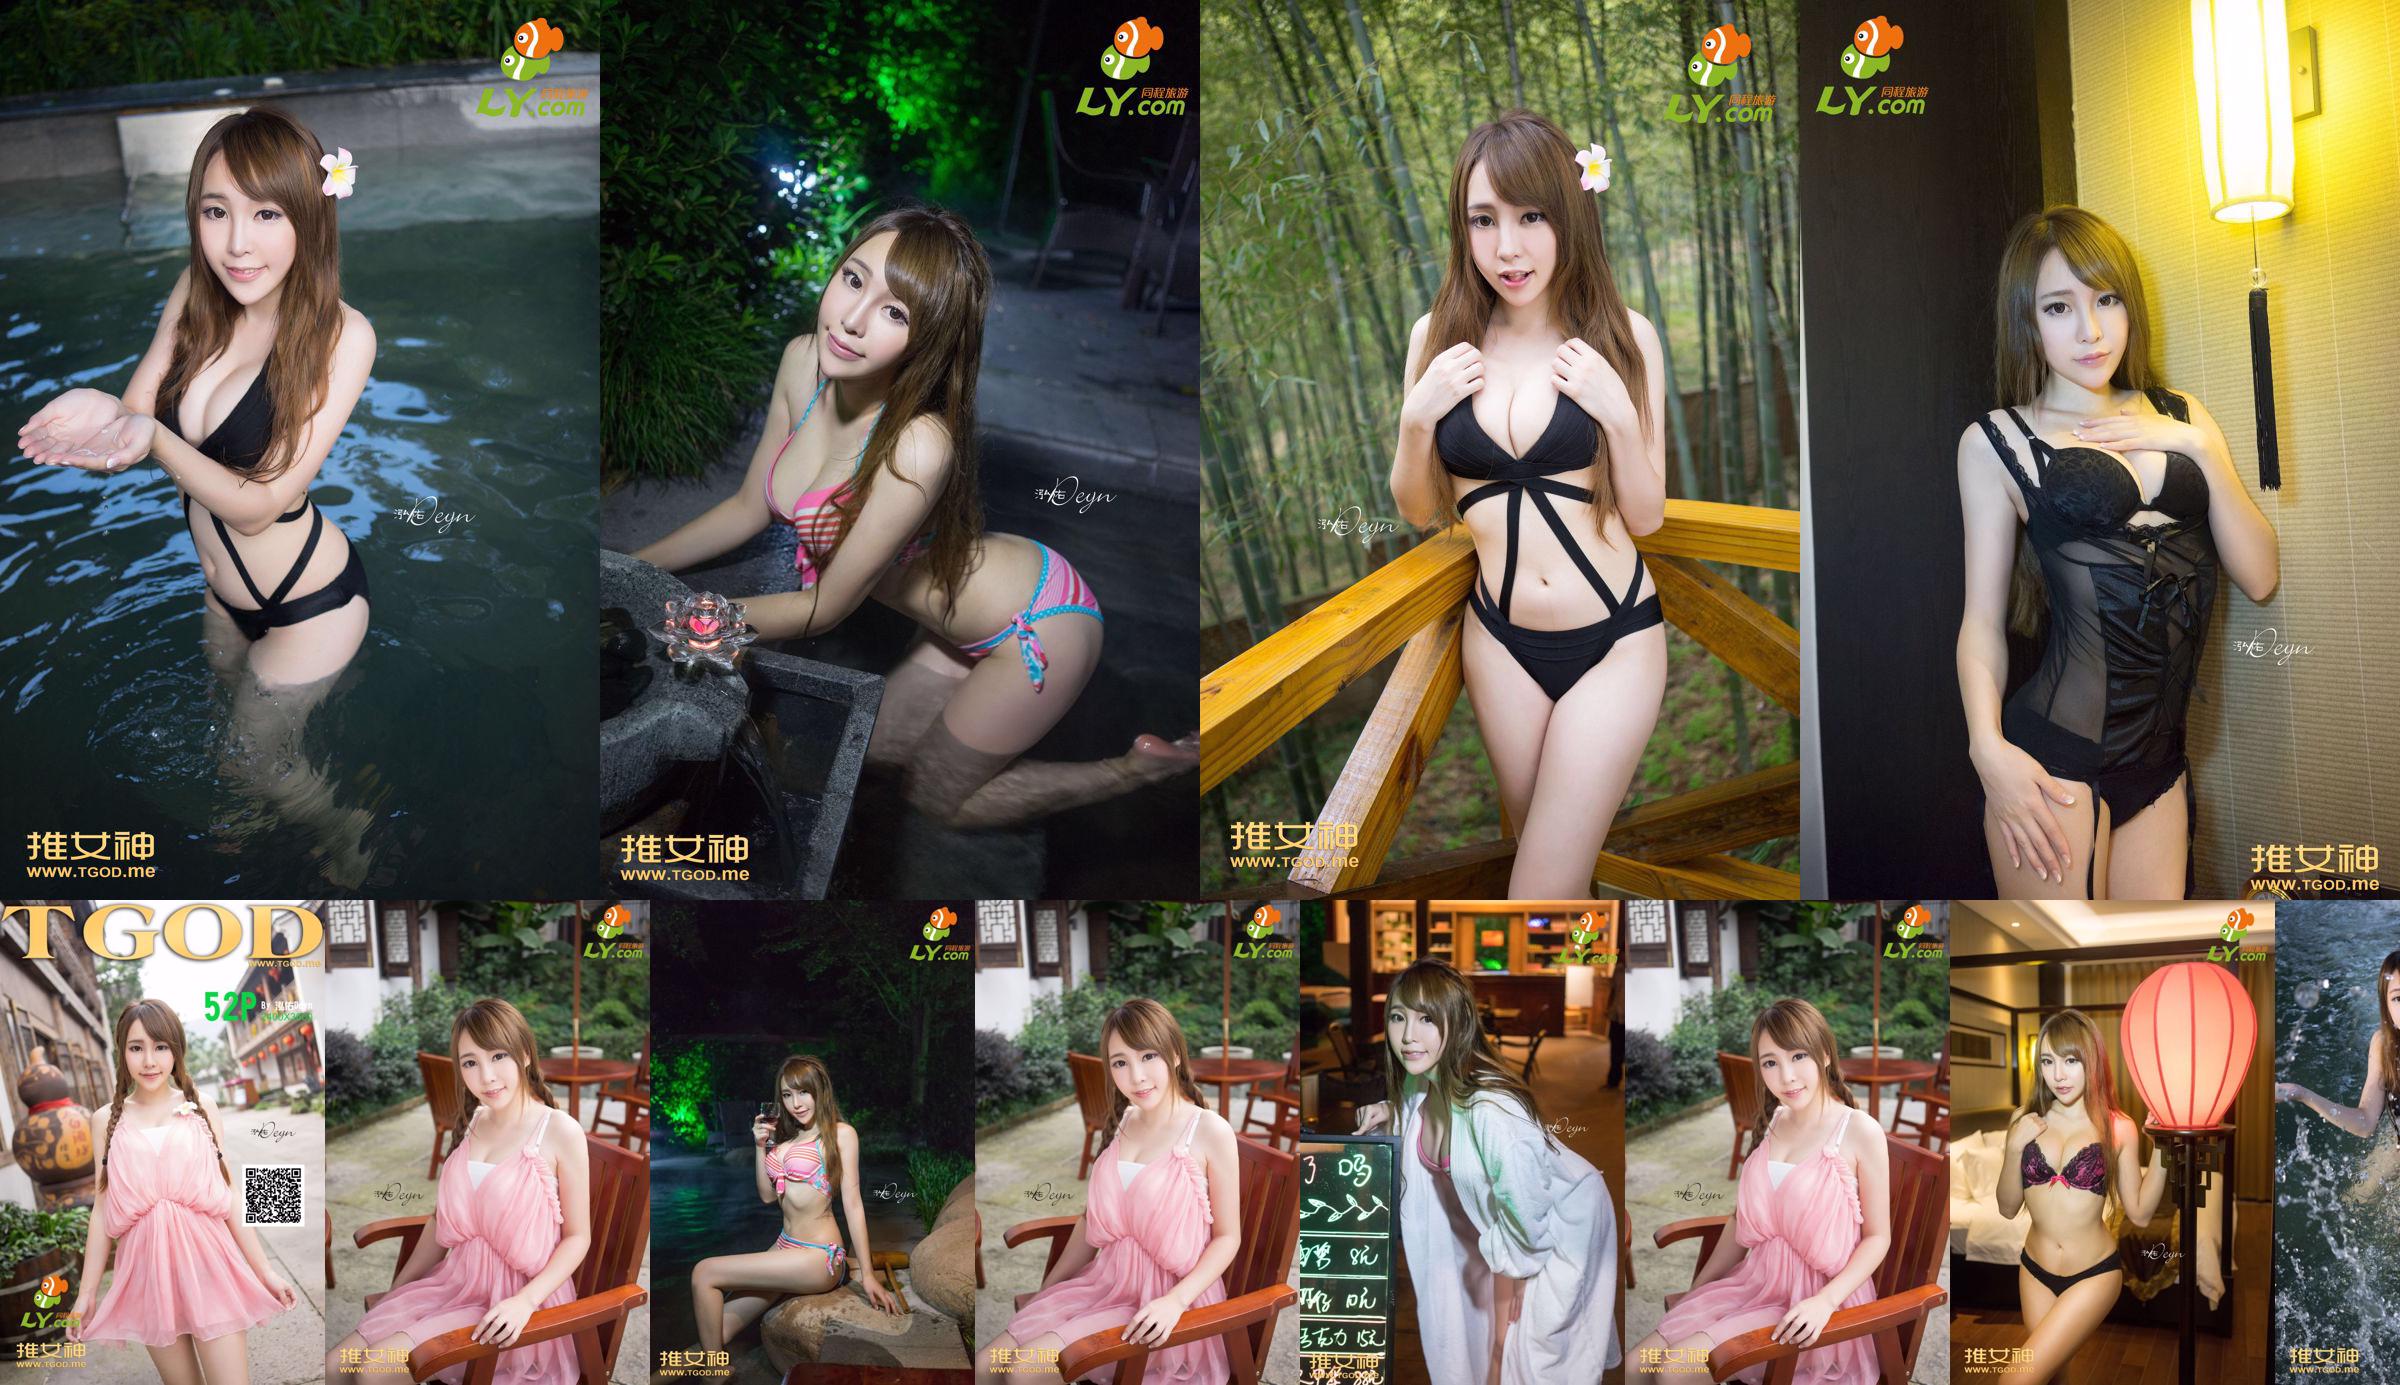 Huang Mengxian "Where Is the Goddess Going Issue 7" [TGOD Push Goddess] No.4047d5 Page 4